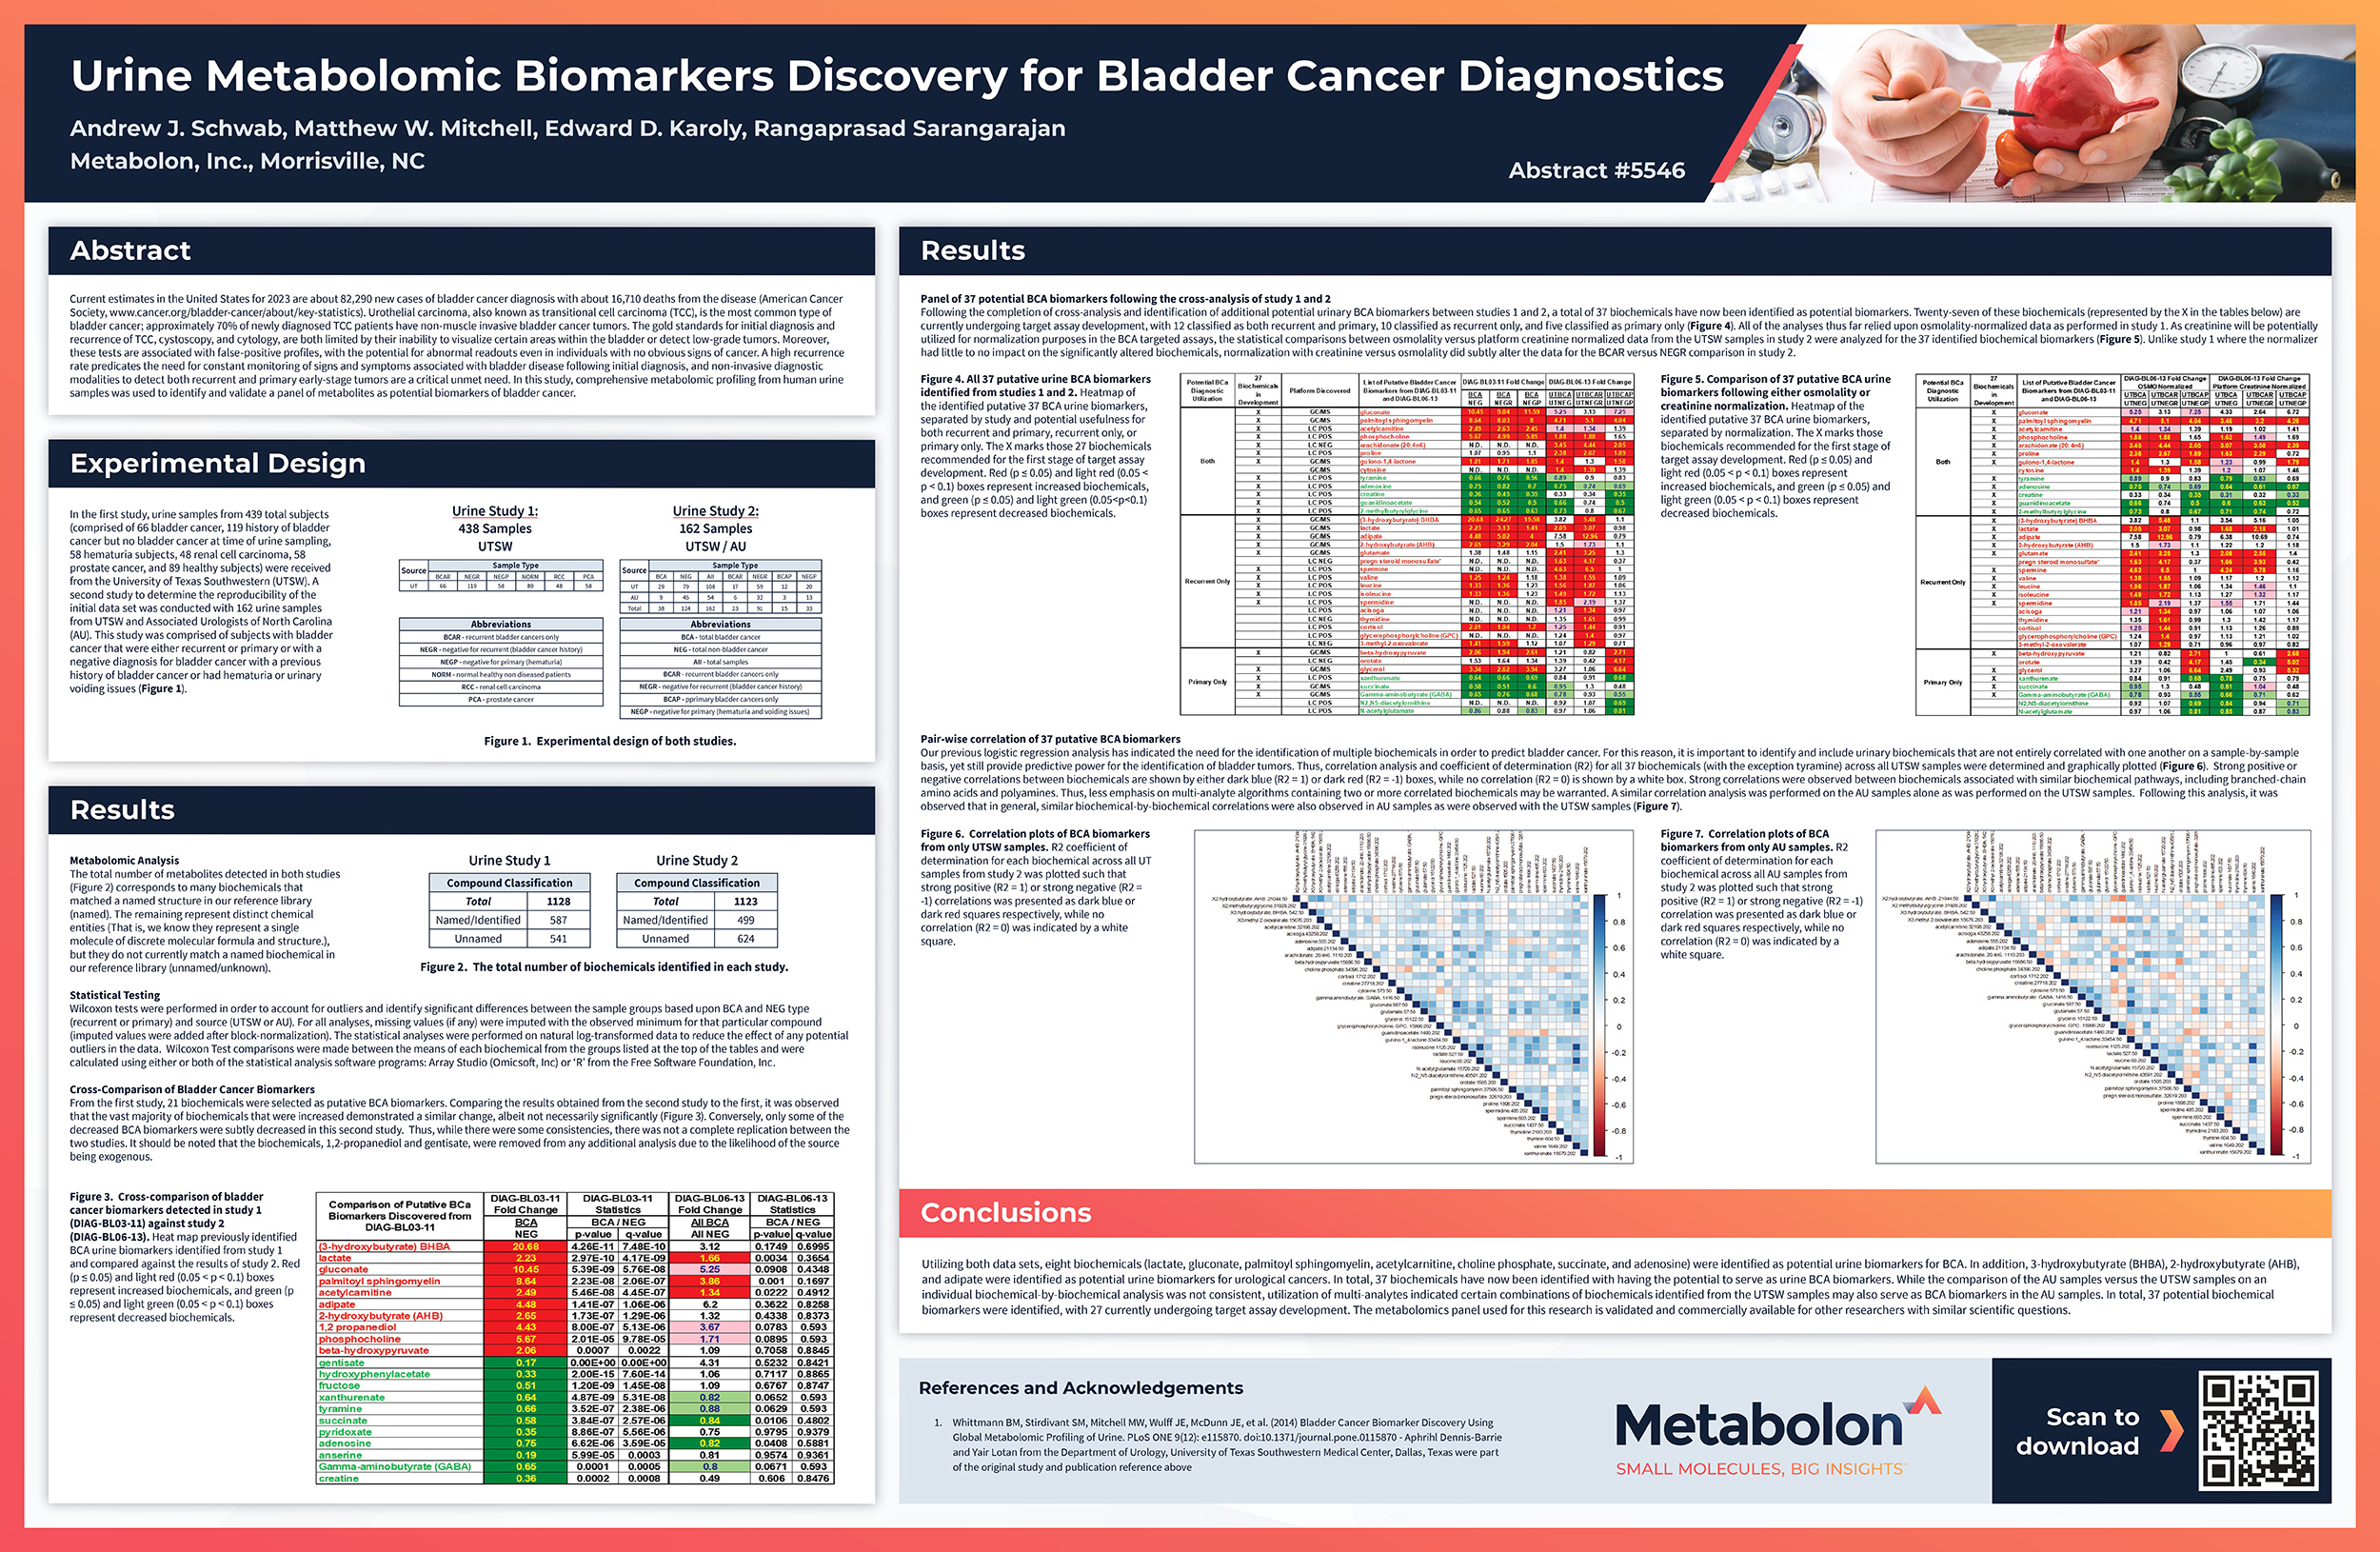 AACR 2023 Urine Metabolomic Biomarkers Discovery for Bladder Cancer Diagnostics